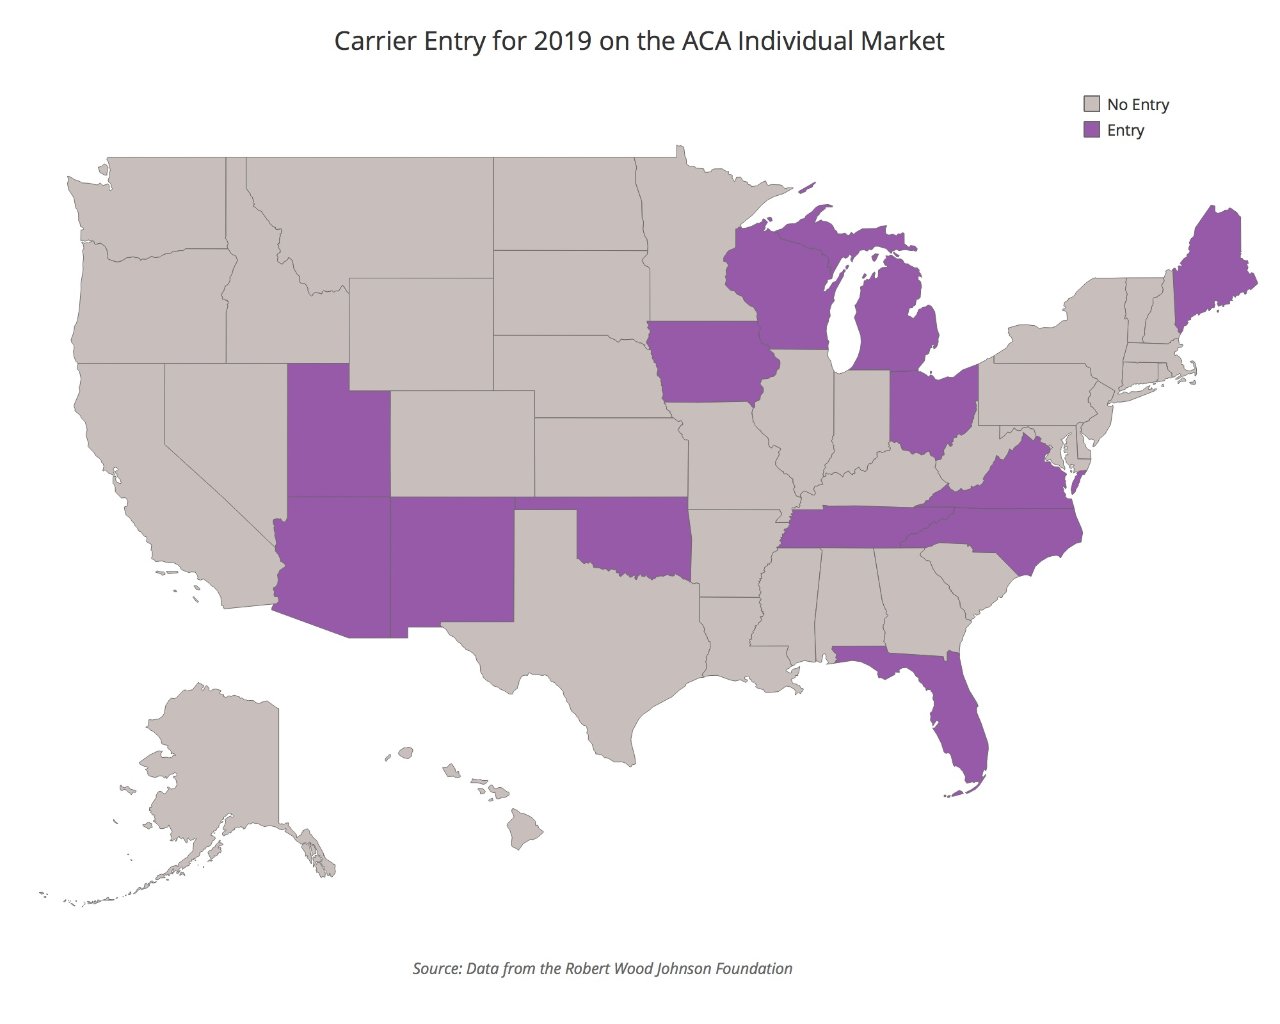 Carrier Entry for 2019 on ACA Individual Market MAP